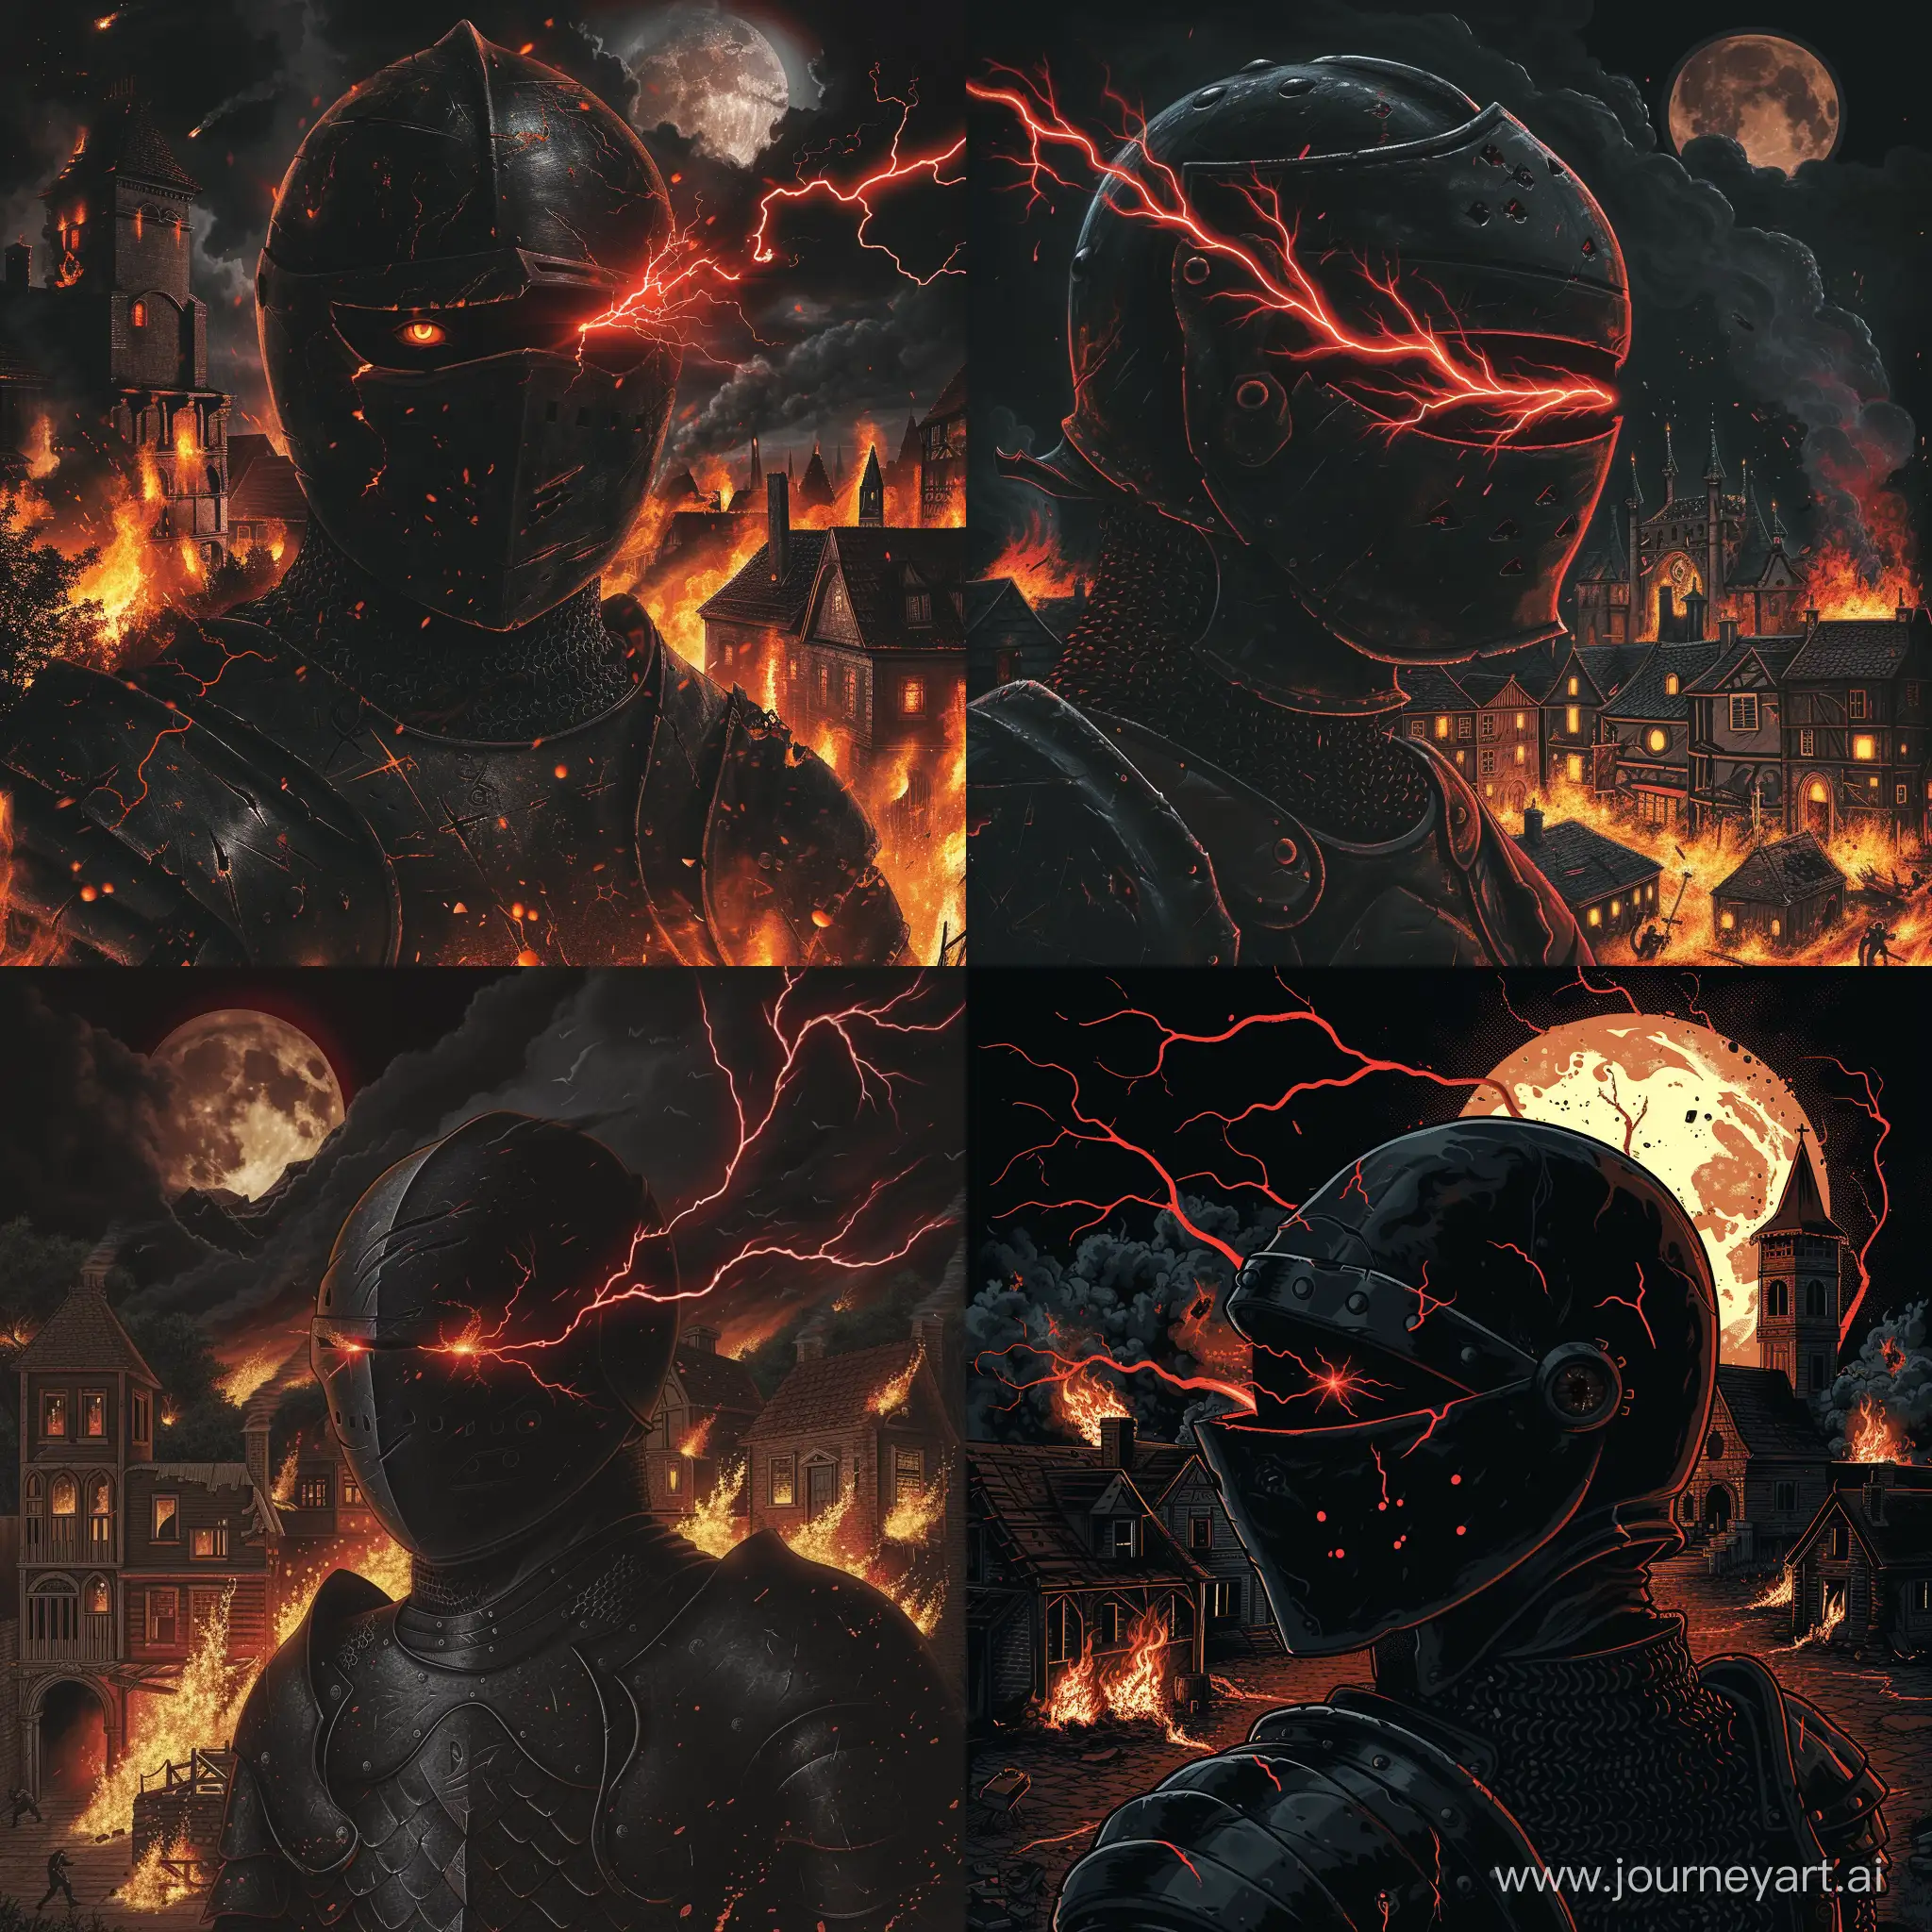 Menacing-Black-Knight-with-Fiery-Background